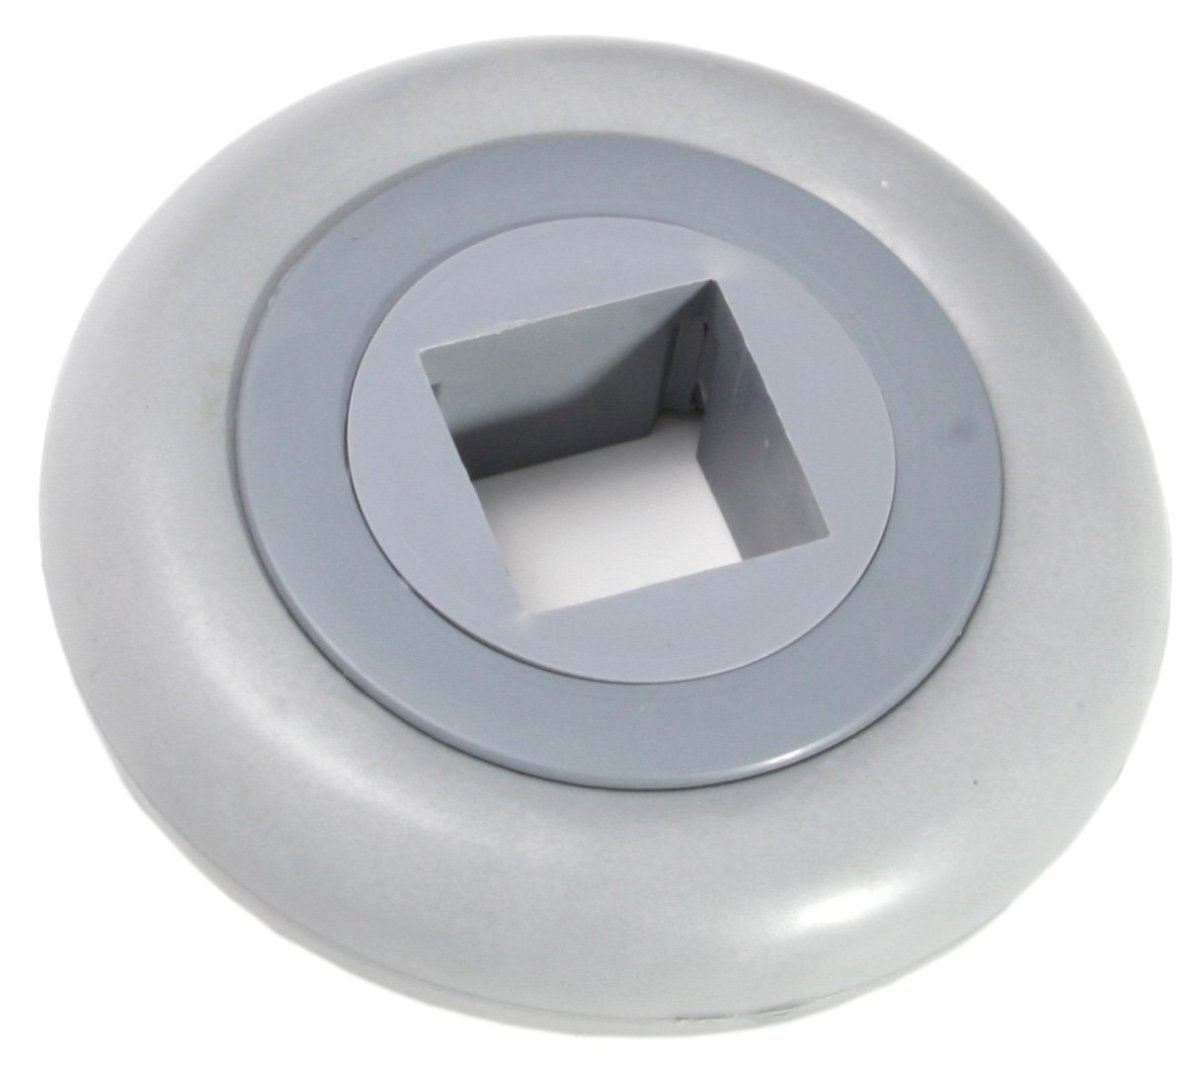 Bumper, Rotating for 30mm Square Tube - Oxford Hardware - BUF115530